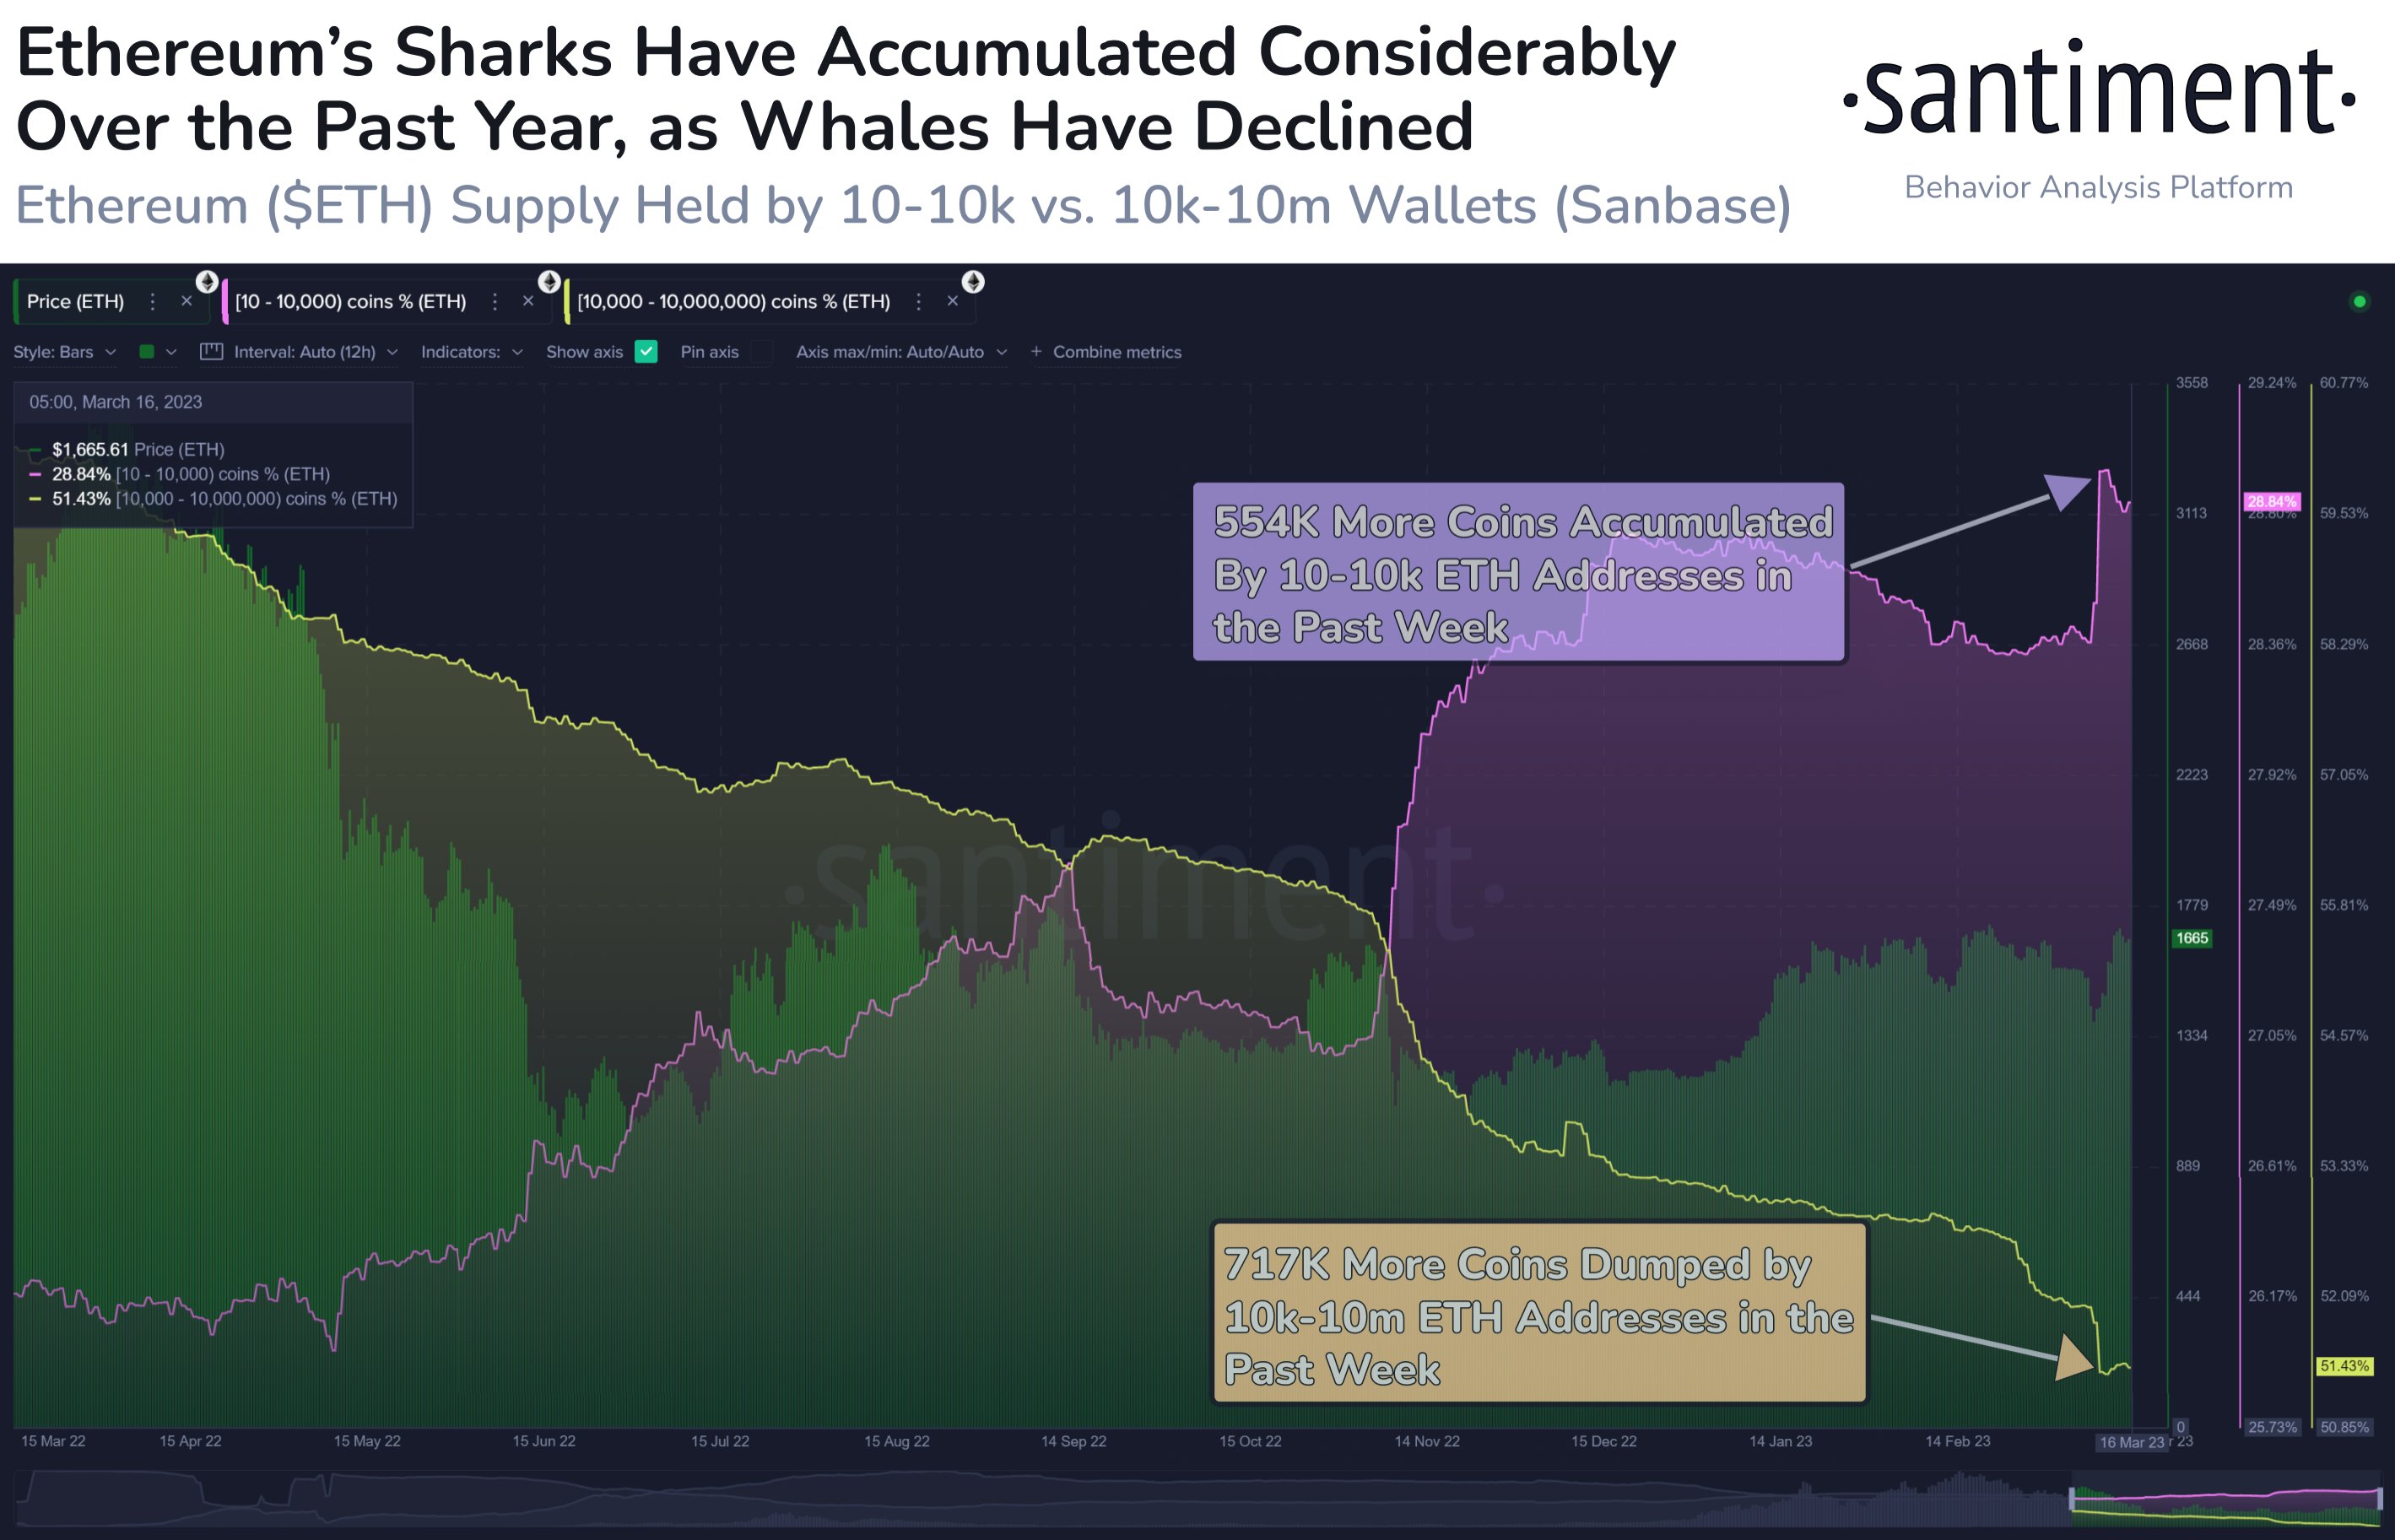 Ethereum Sharks And Whales